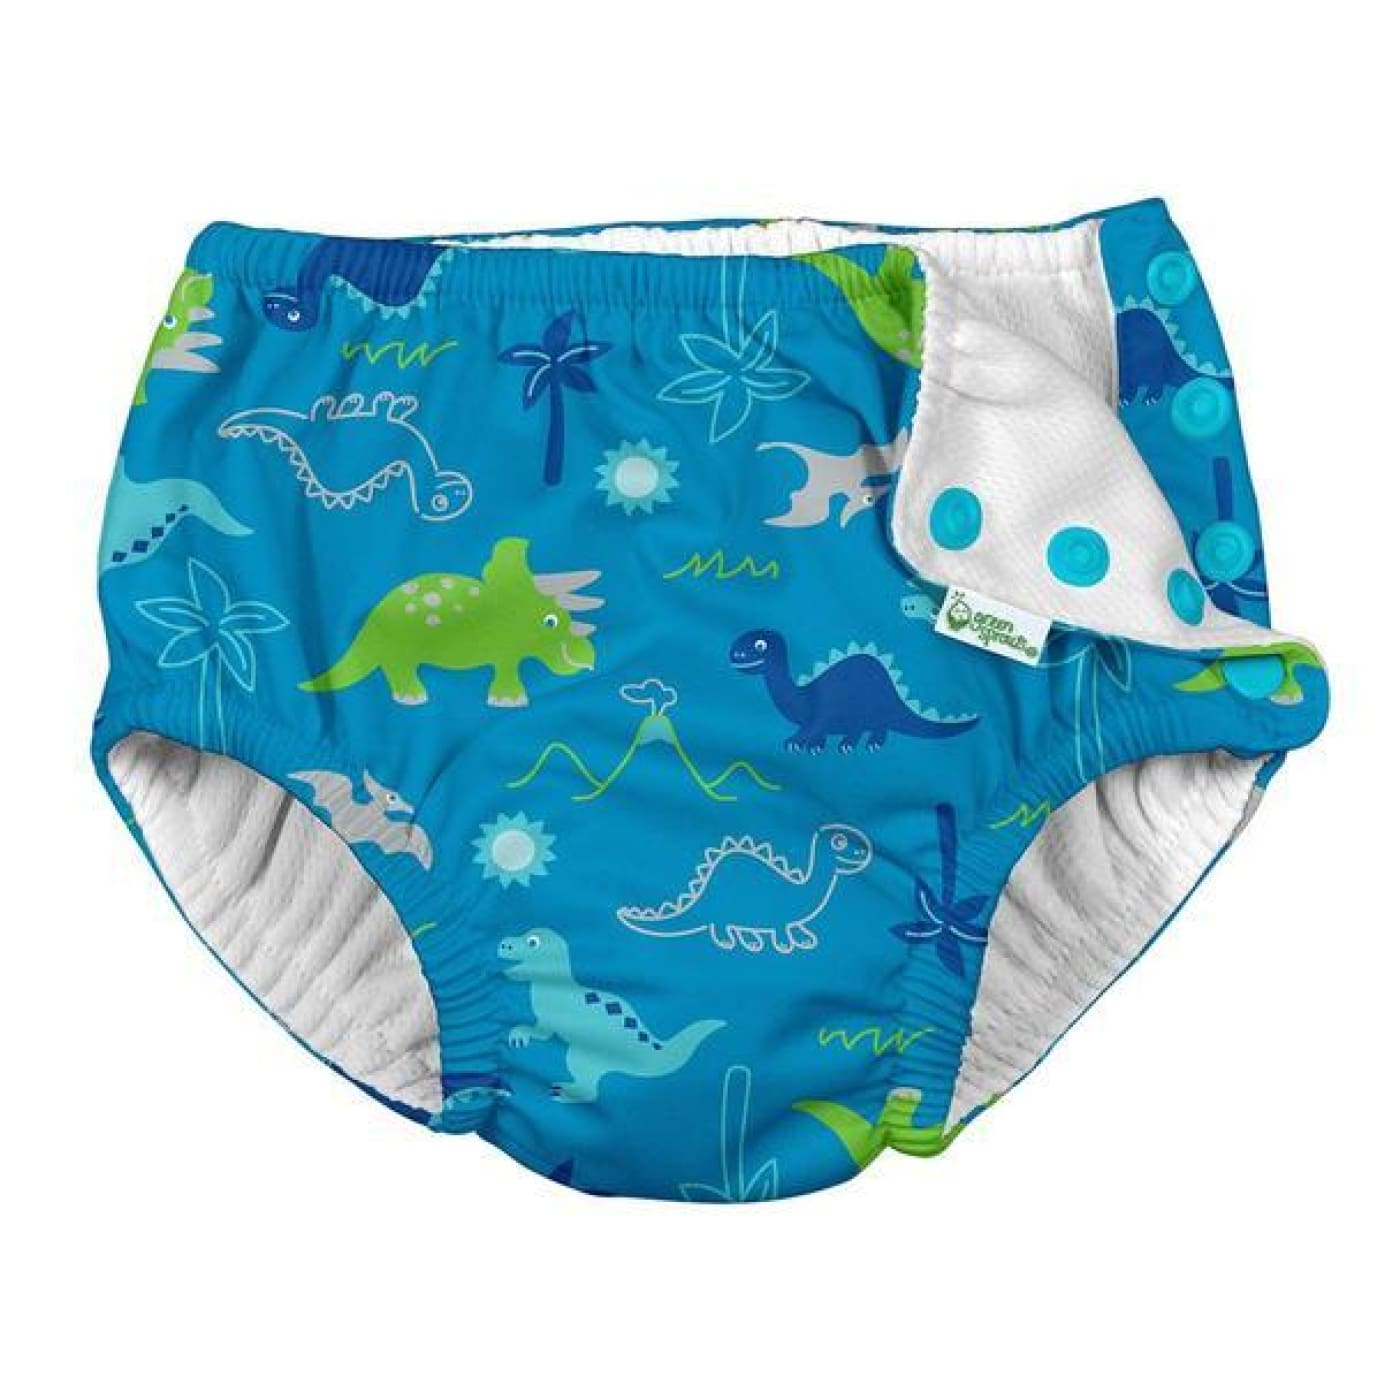 i play Snap Reusable Absorbent Swimsuit Diaper 6M - Aqua Dinosaurs - 6M / Aqua Dinosaurs - BABY & TODDLER CLOTHING - SWIMMERS/ACCESSORIES